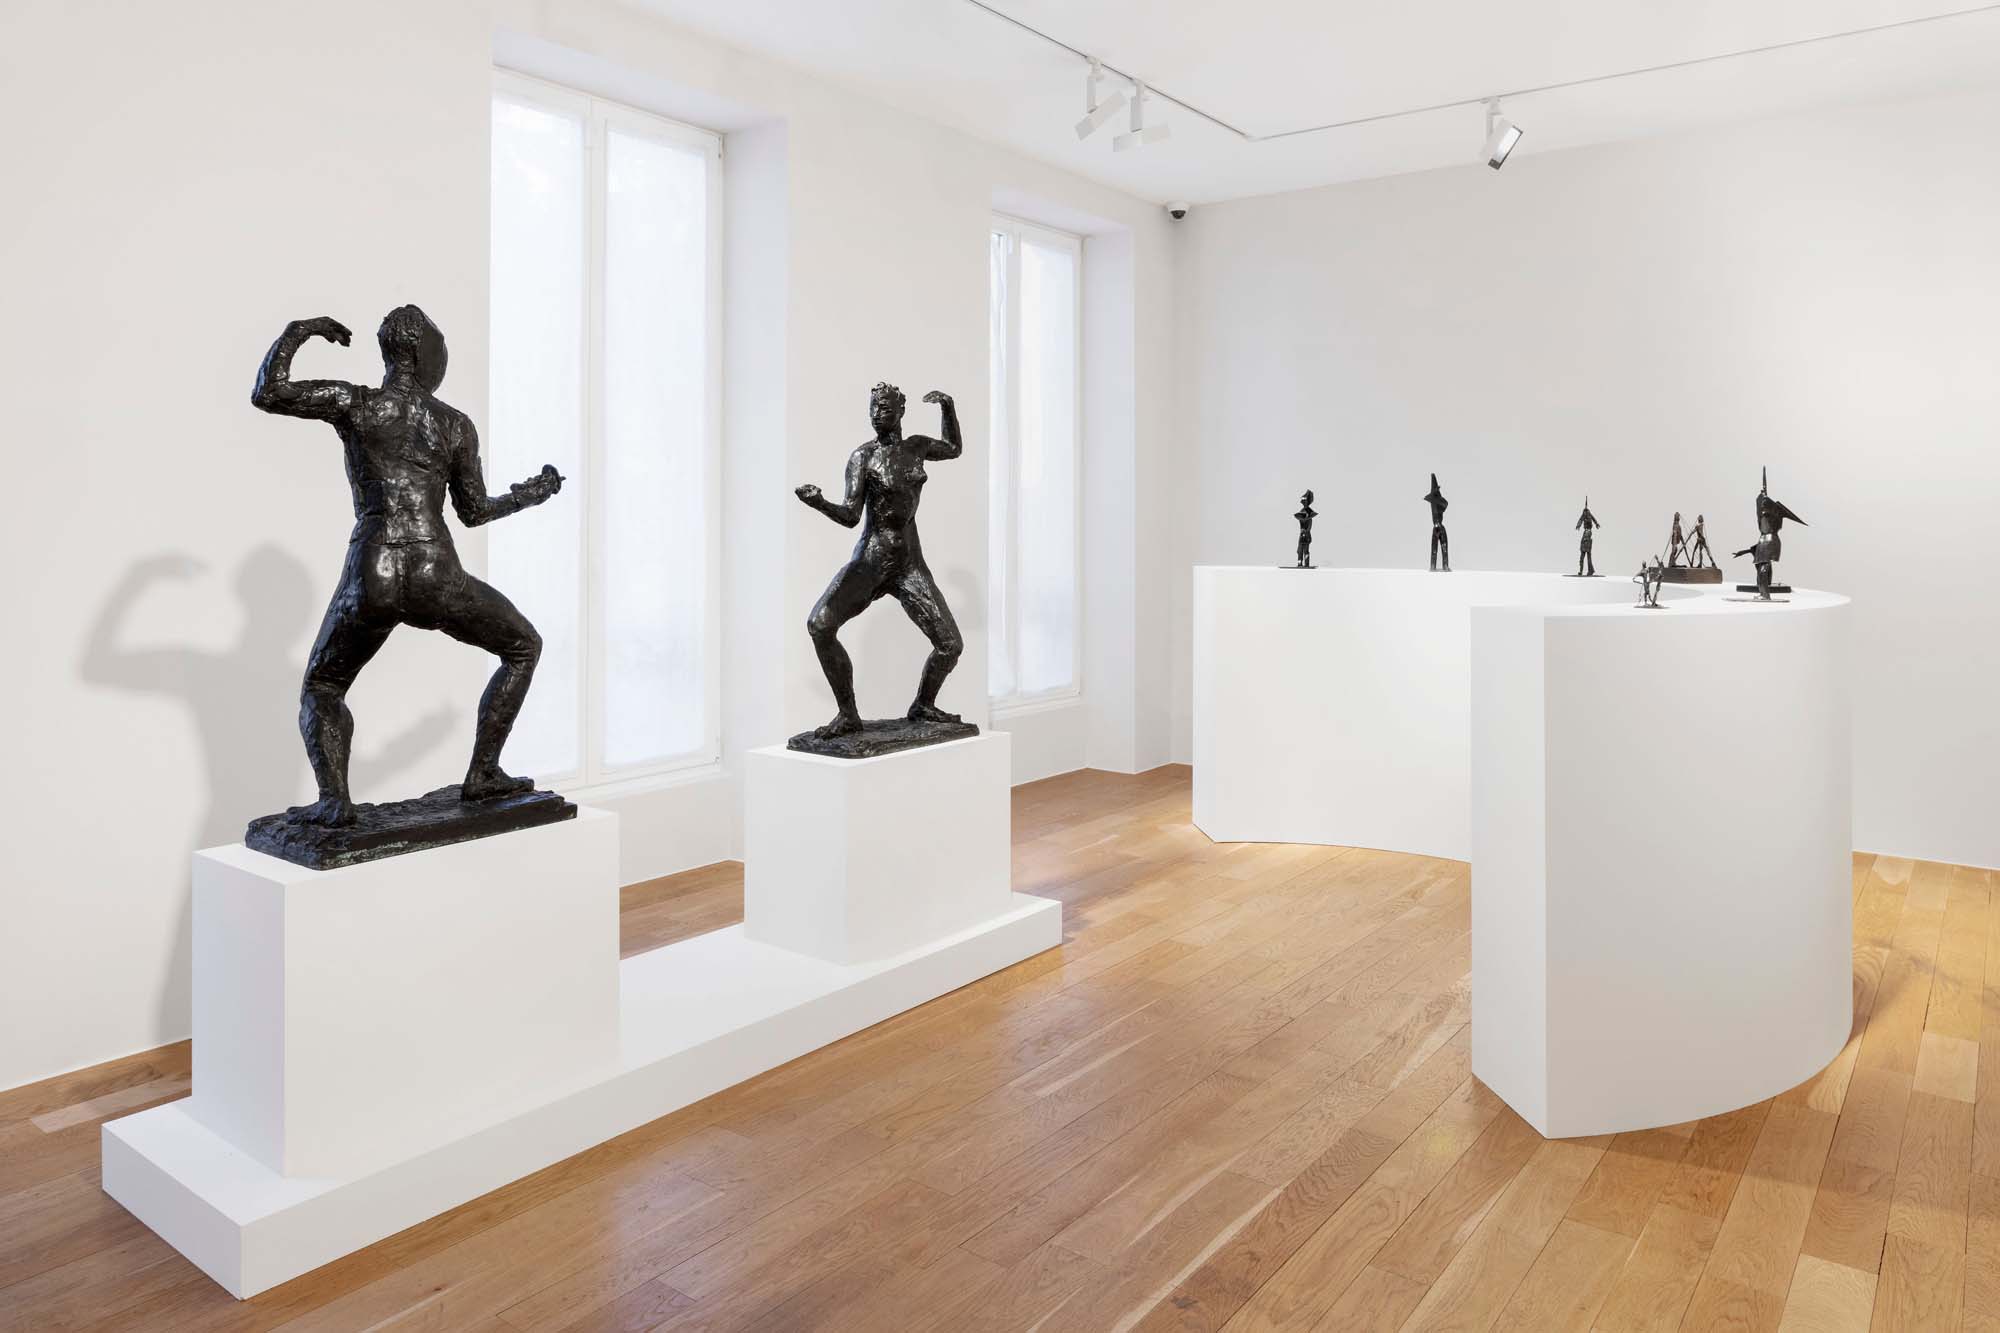 Installation image for Germaine Richier, at Perrotin